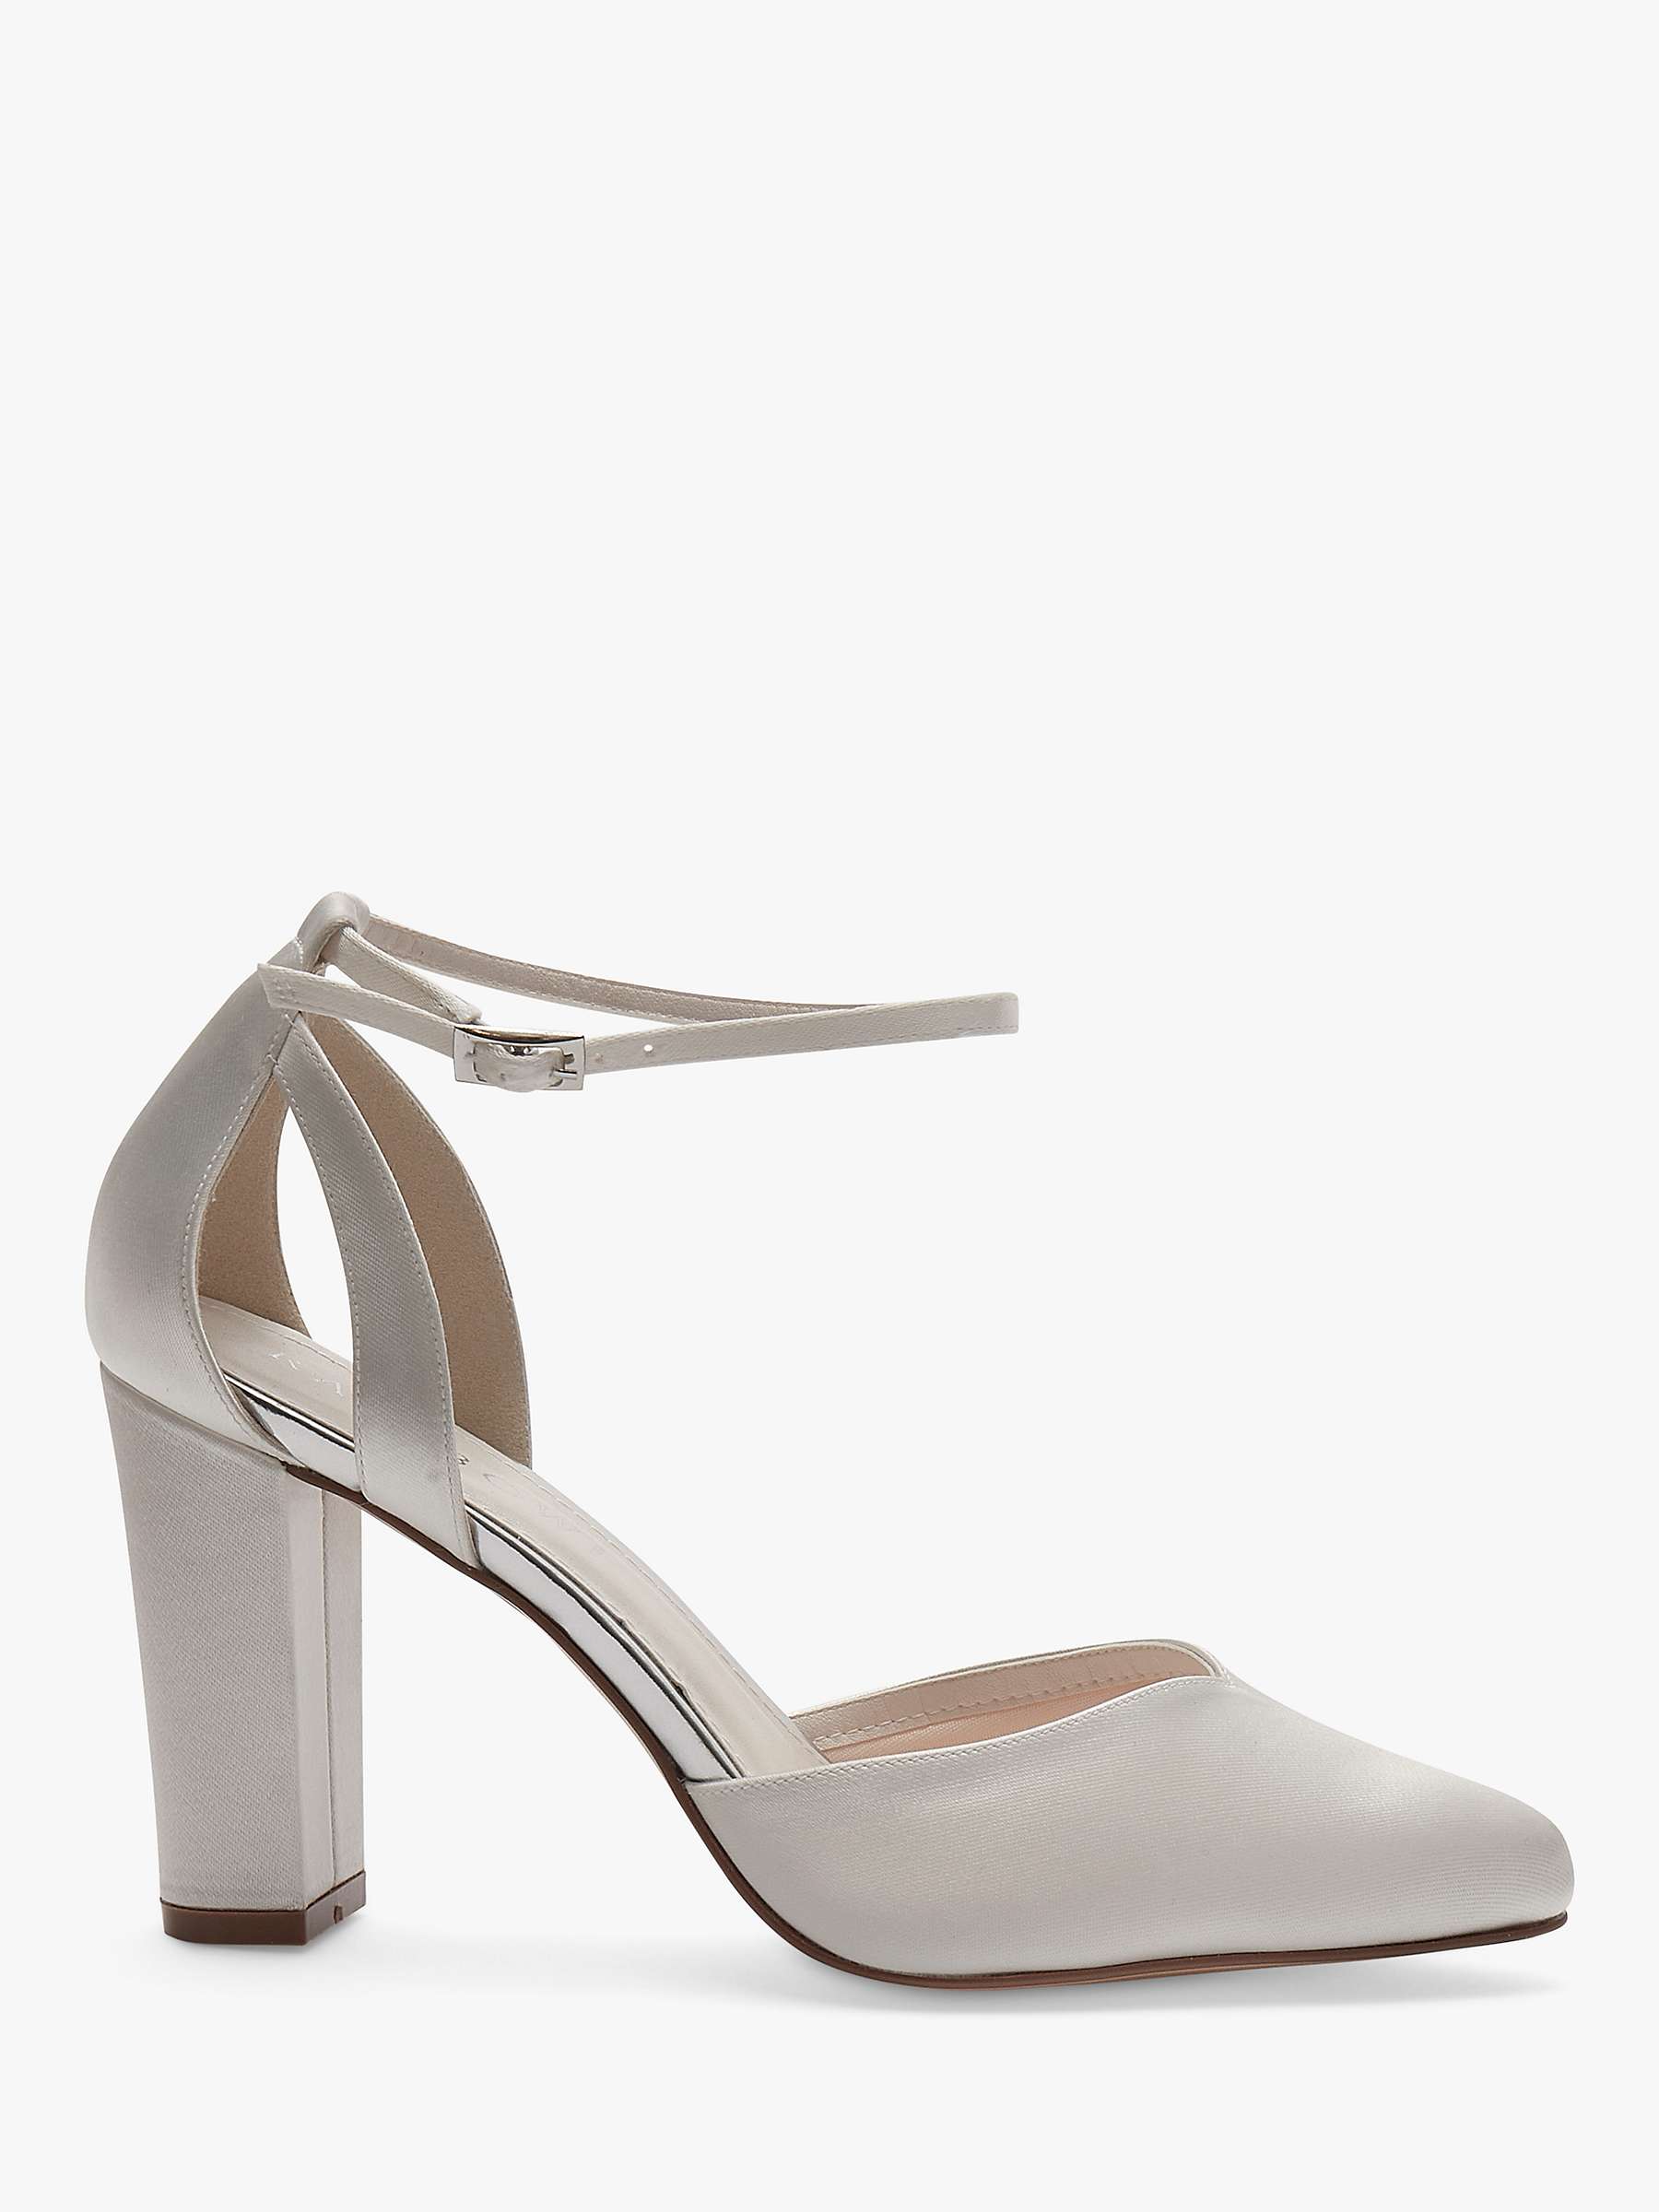 Buy Rainbow Club Eve Block Heel Strappy Court Shoes, Ivory Satin Online at johnlewis.com